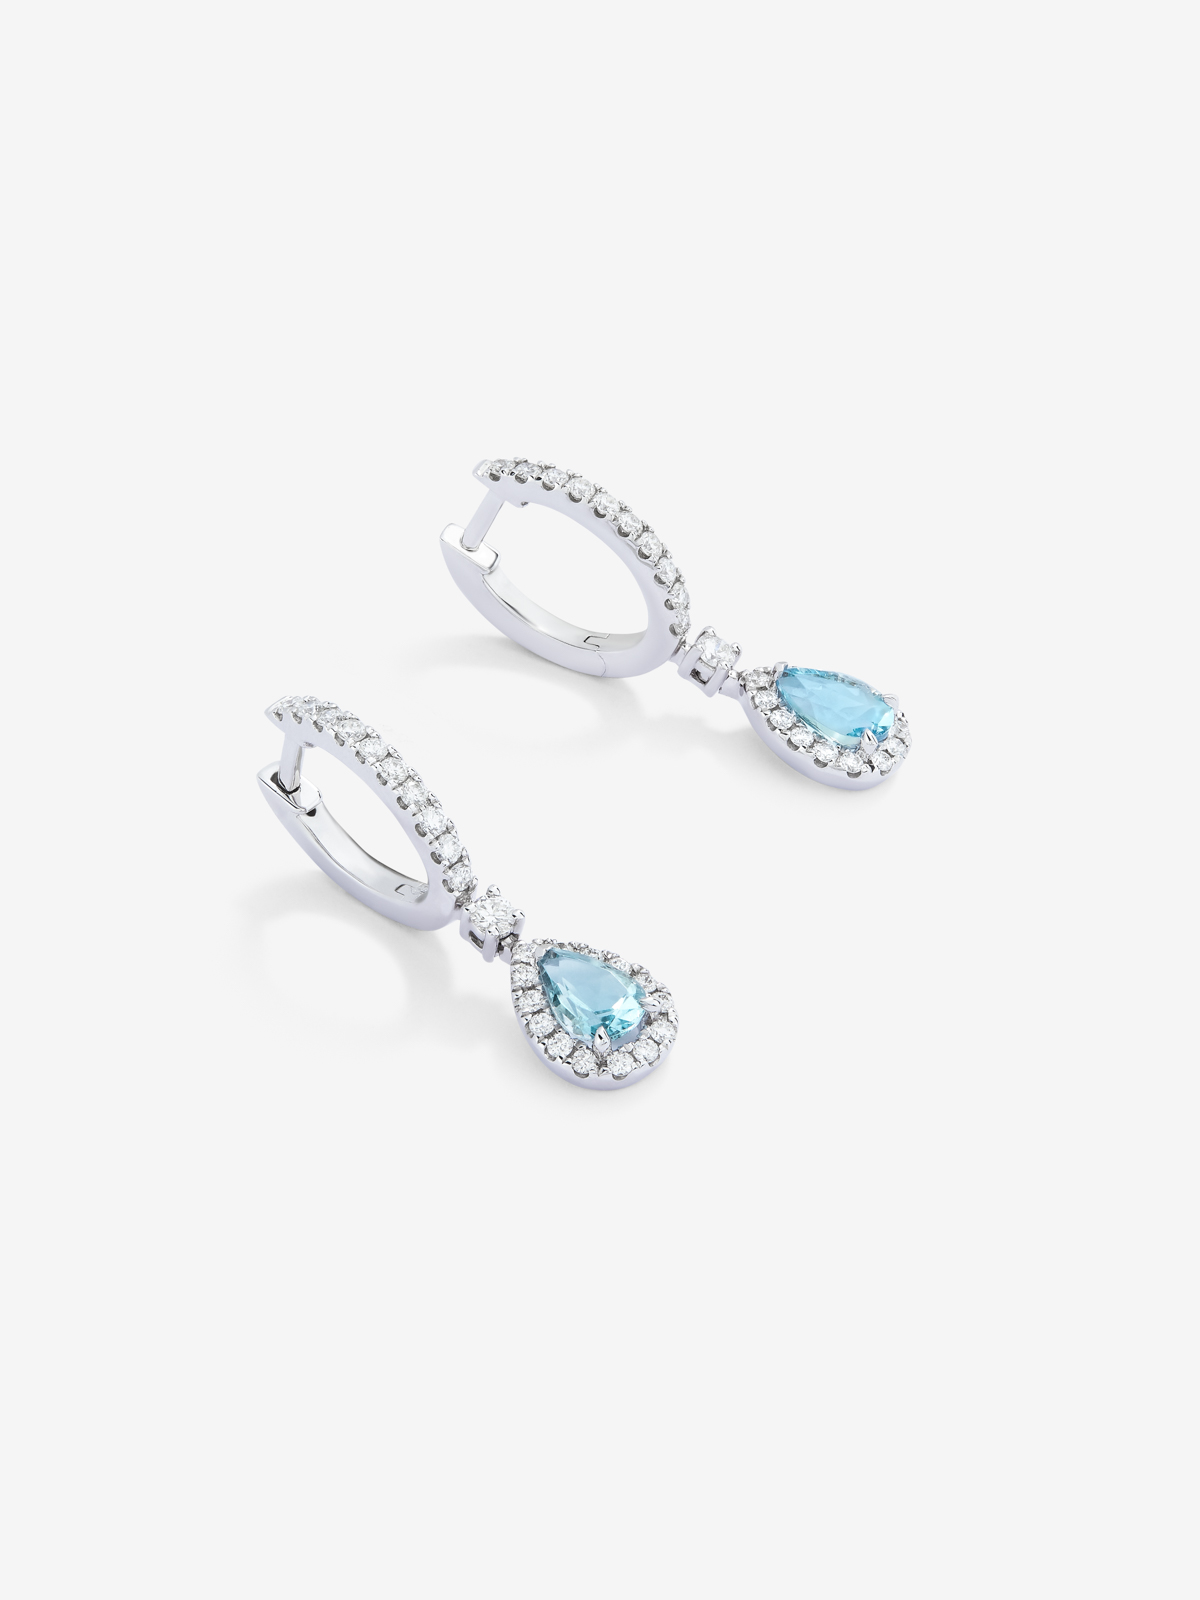 18K white gold earrings with blue aquamarines in 0.43 cts and white diamonds in bright size